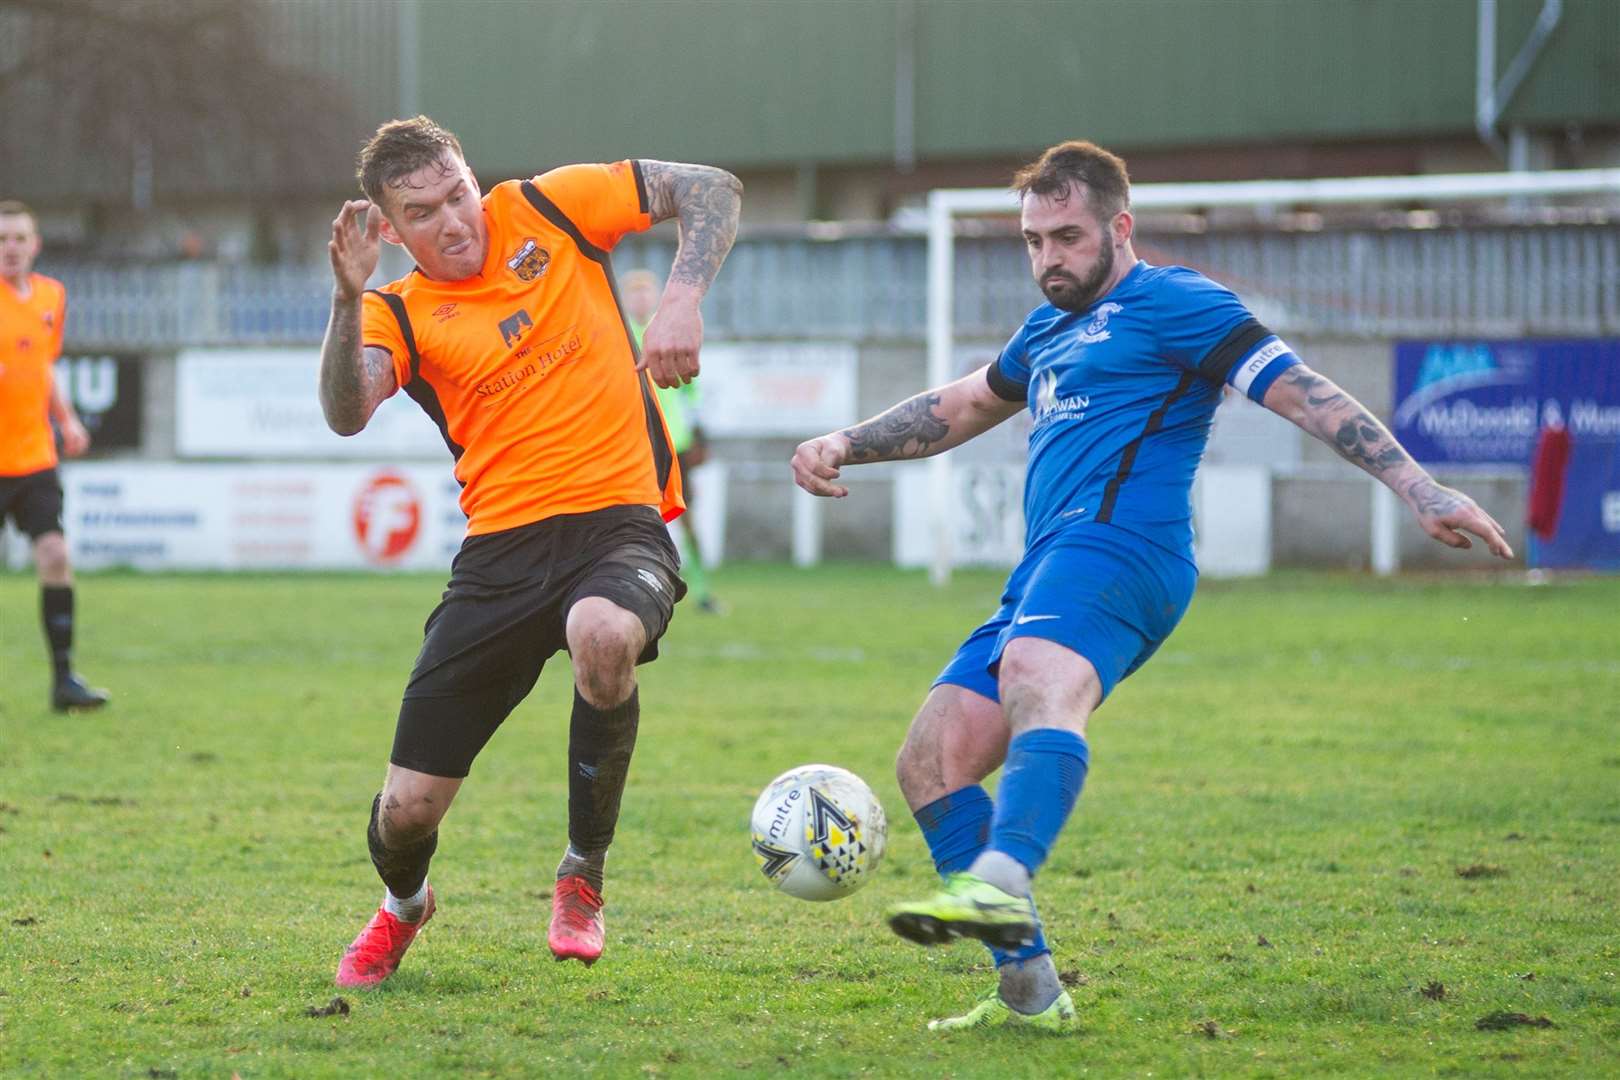 Rothes' Darryl McHardy goes in for a challenge on Strathspey skipper James Fraser. ..Rothes FC (3) vs Strathspey Thistle (2) - Highland Football League 01/02/2020 - MacKessack Park, Rothes...Picture: Daniel Forsyth..